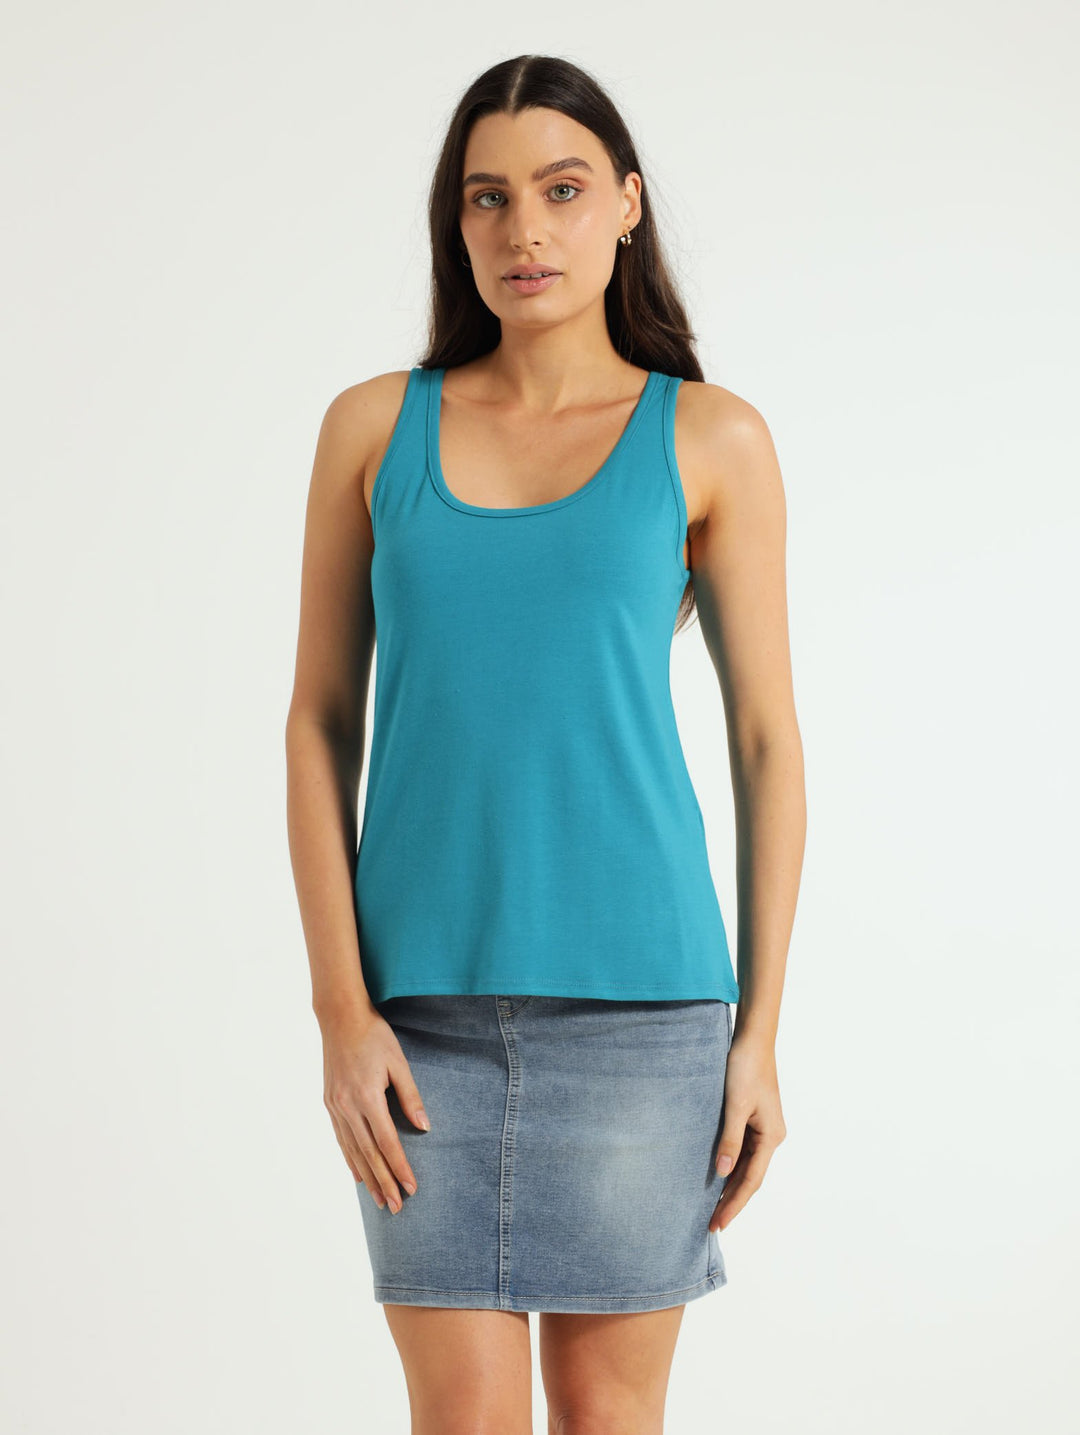 Scoop Neck Stretch Tank Top - Turquoise